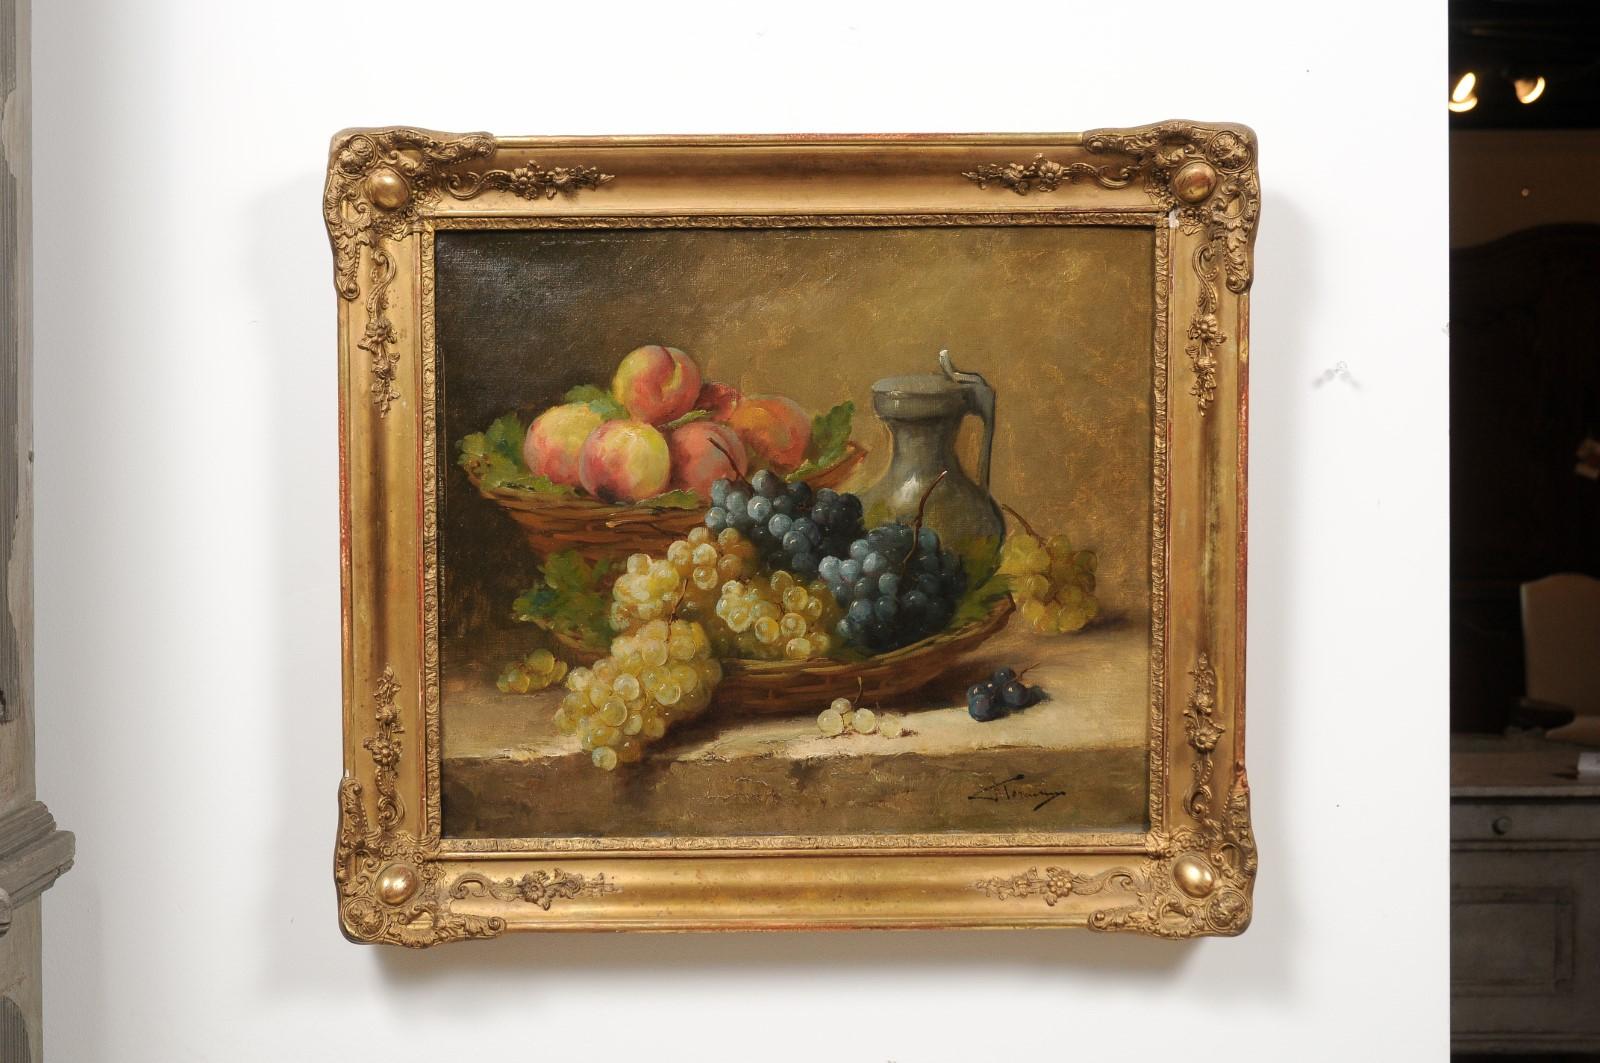 An Italian oil on canvas still-life painting from the 19th century in carved giltwood frame, signed Florentine. Created in Italy during the 19th century, this still-life painting depicts mouth-watering grapes and peaches displayed in two wicker